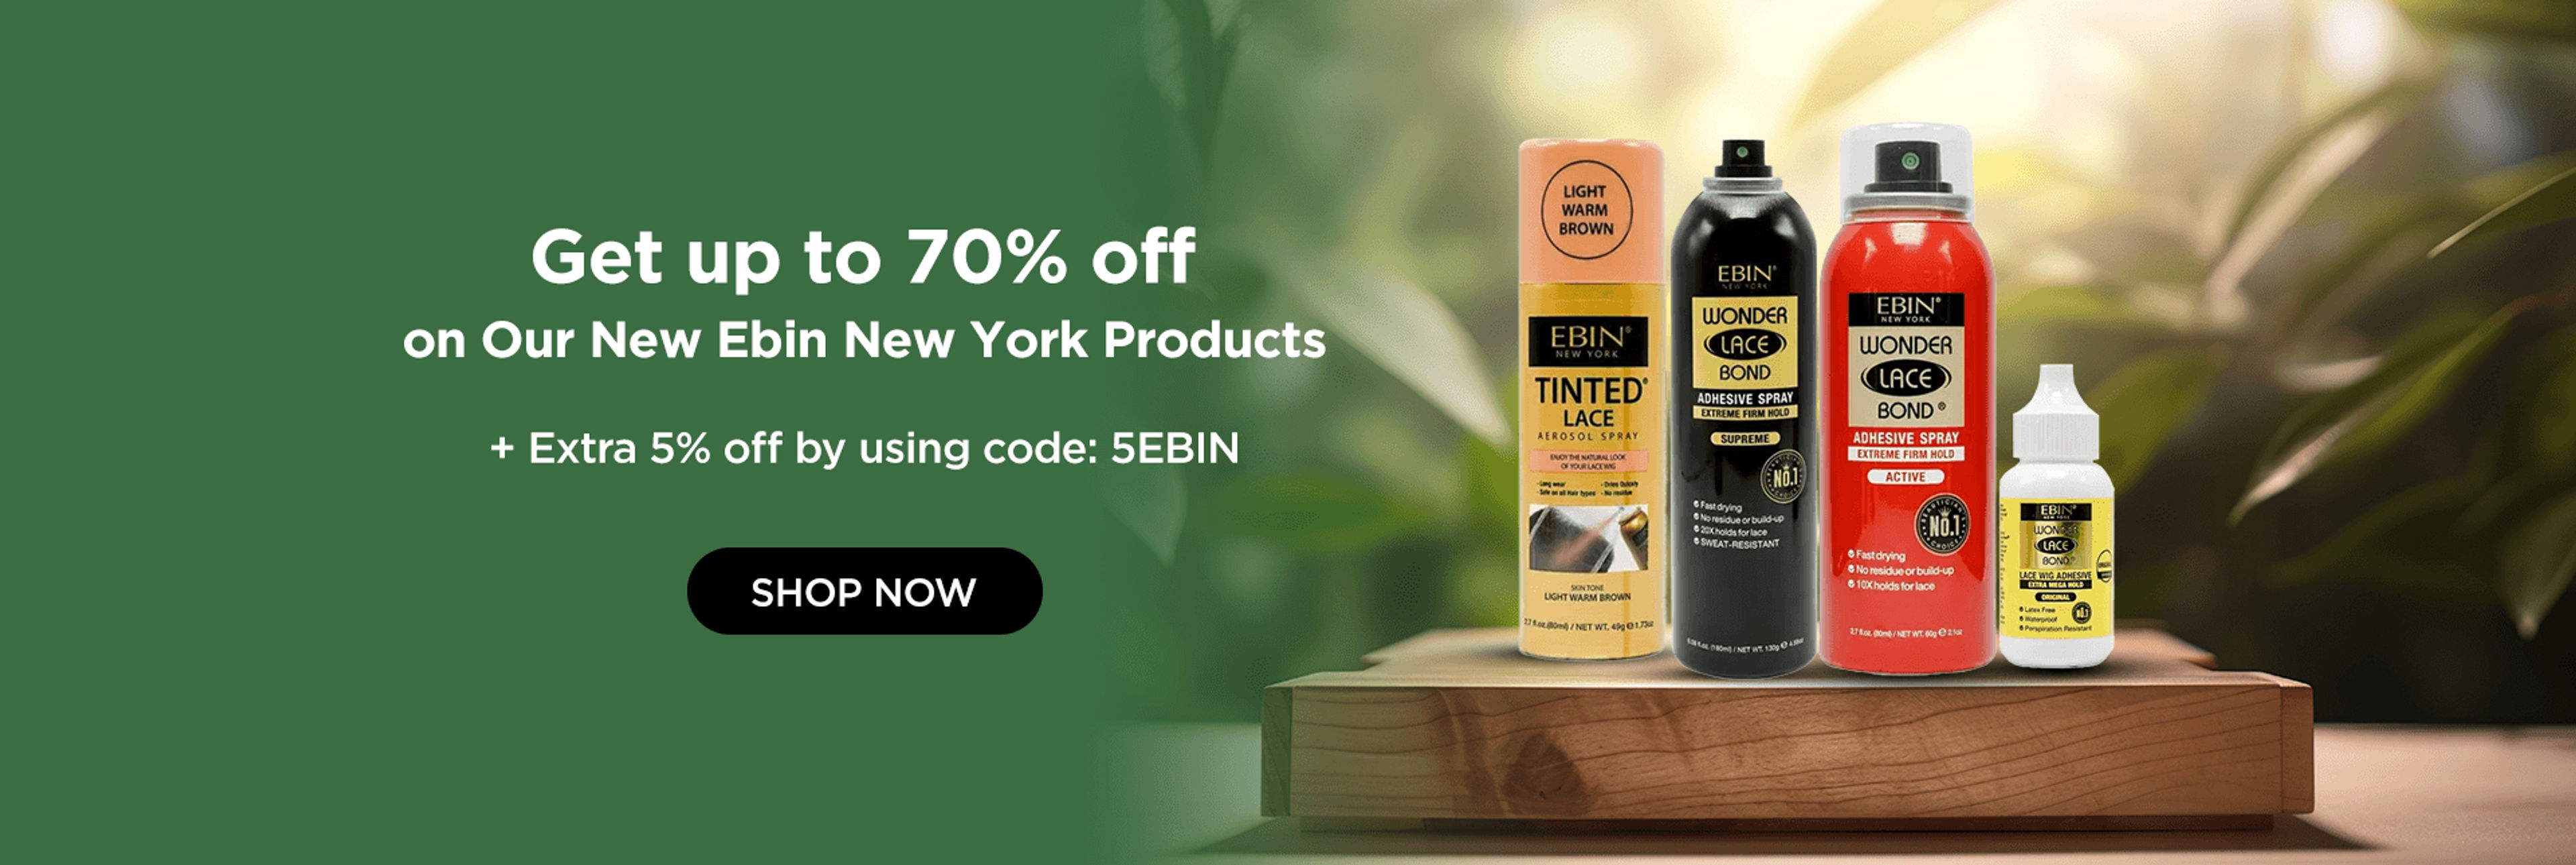 Get up to 70% off on Our New Ebin New York Products + Extra 5% off by using code